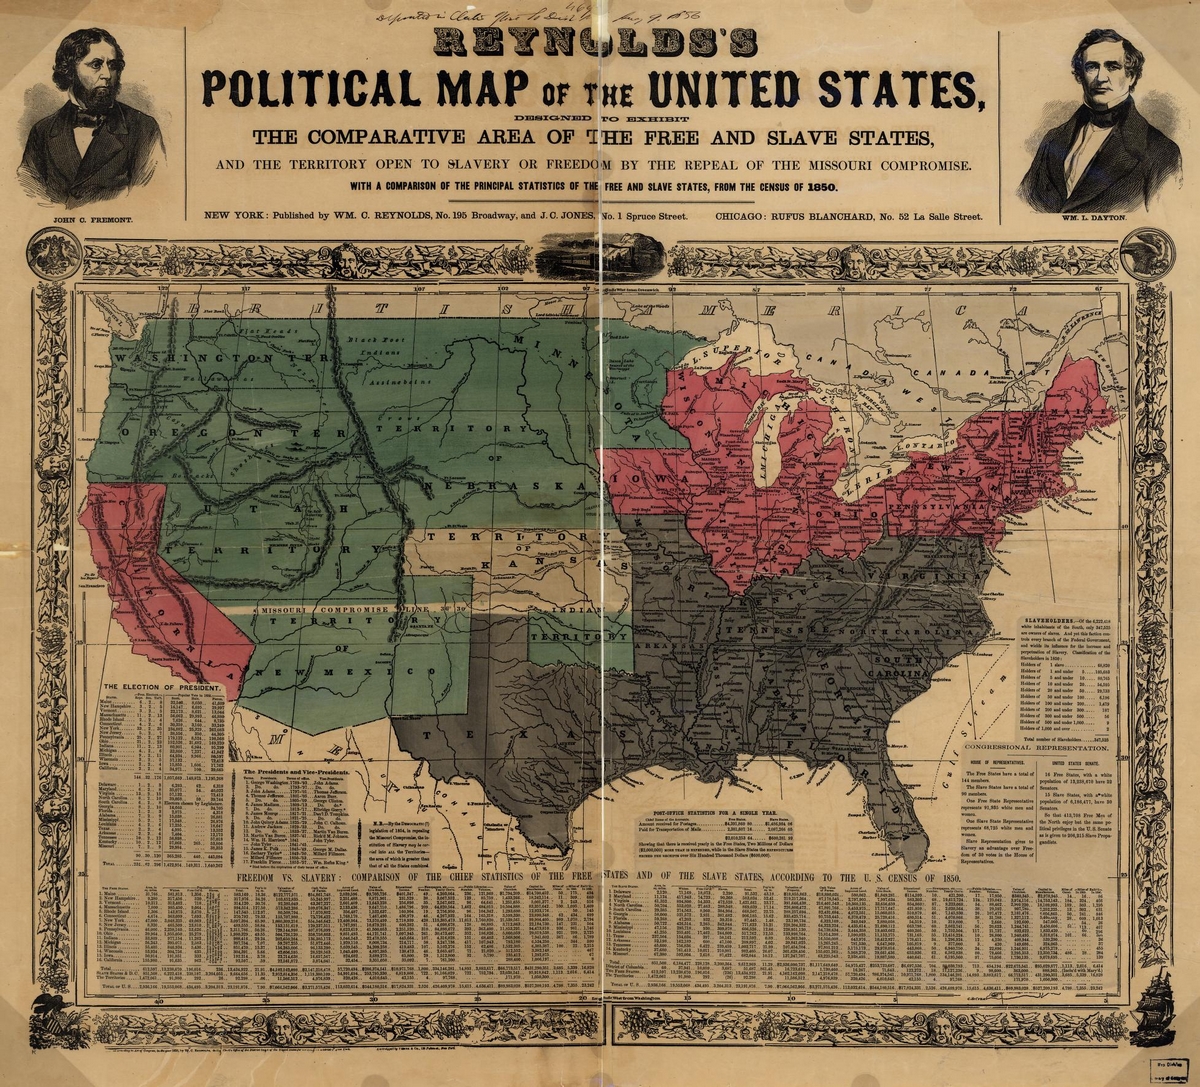 1850 map showing the split between free and slave lands in the United States.